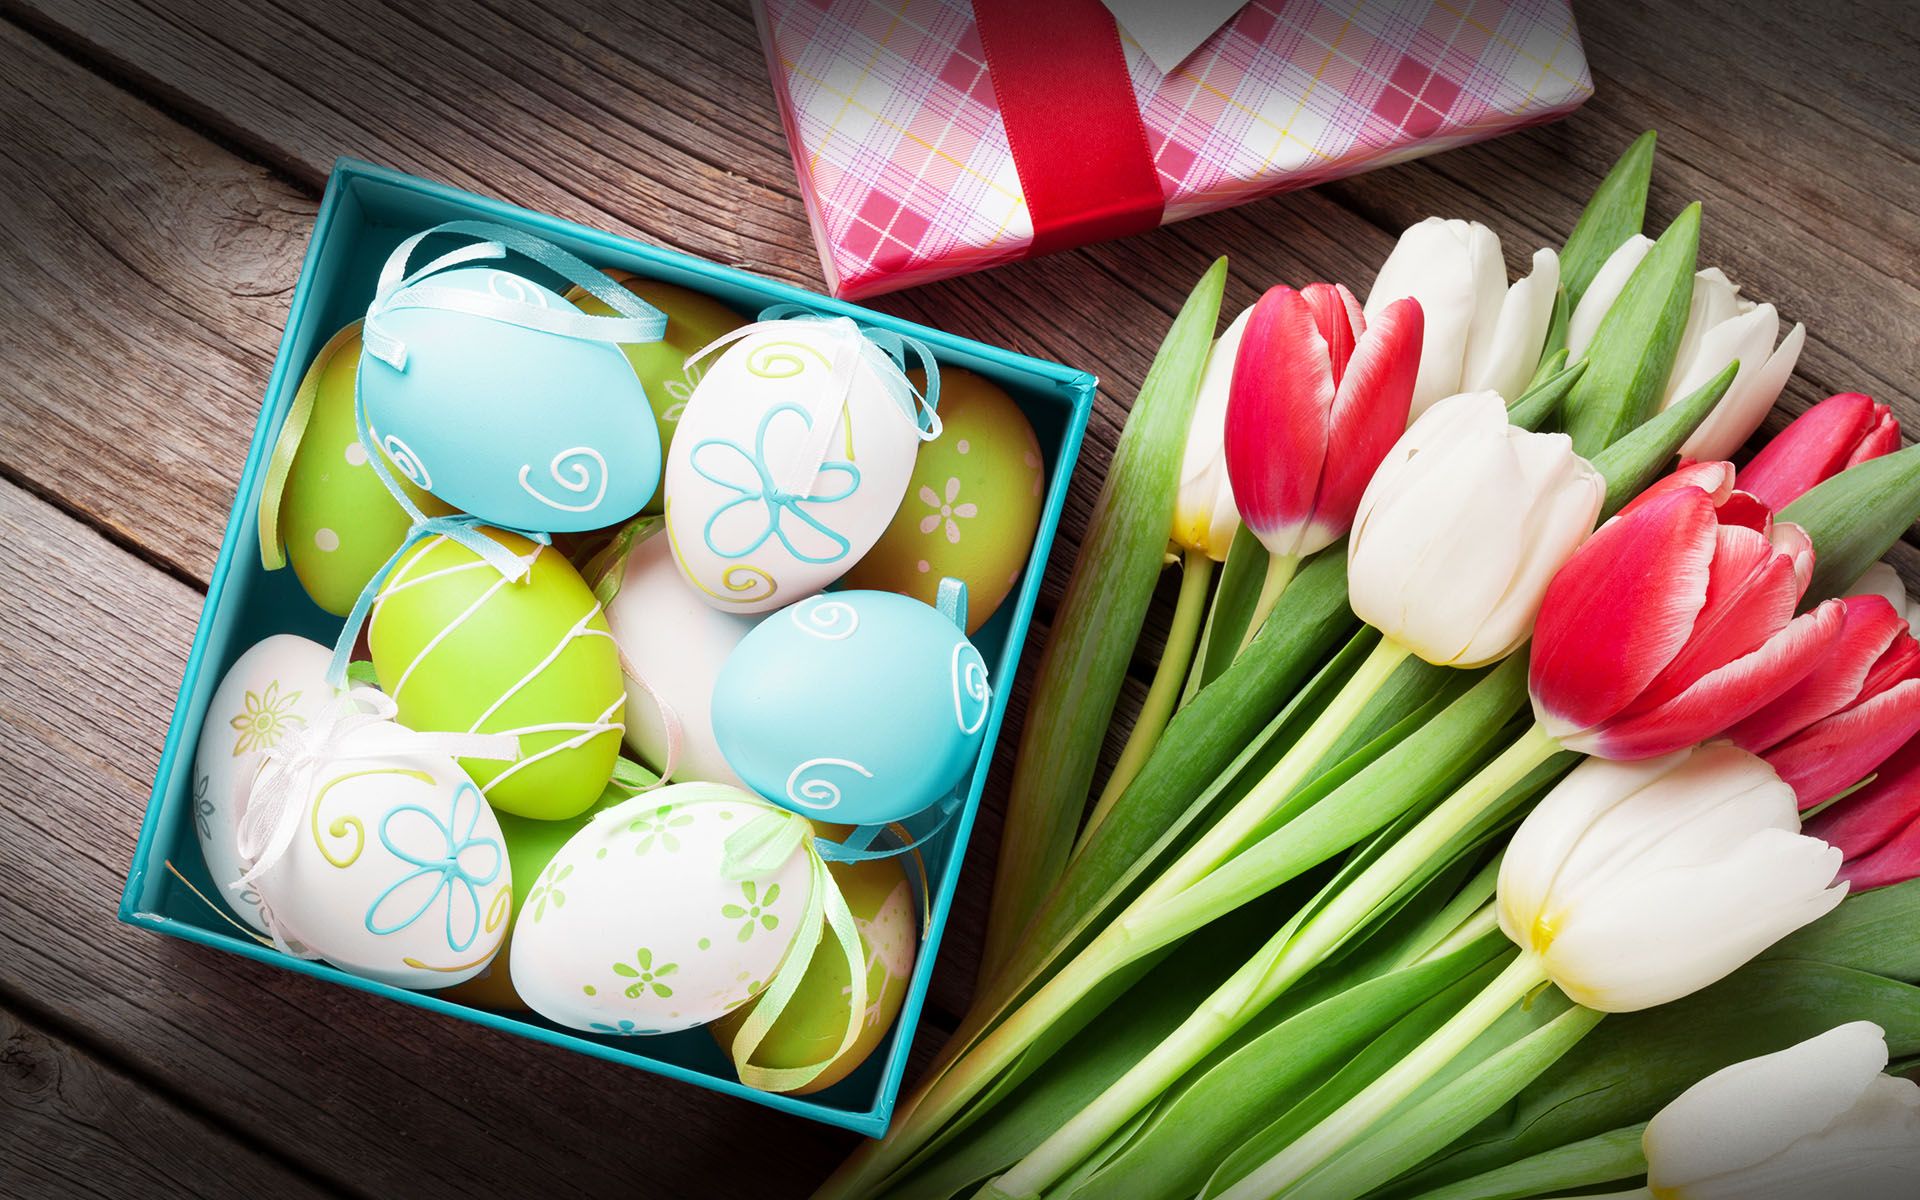 Download wallpaper Easter eggs, bouquet of tulips, spring flowers, Easter background, spring, Easter, wooden background for desktop with resolution 1920x1200. High Quality HD picture wallpaper